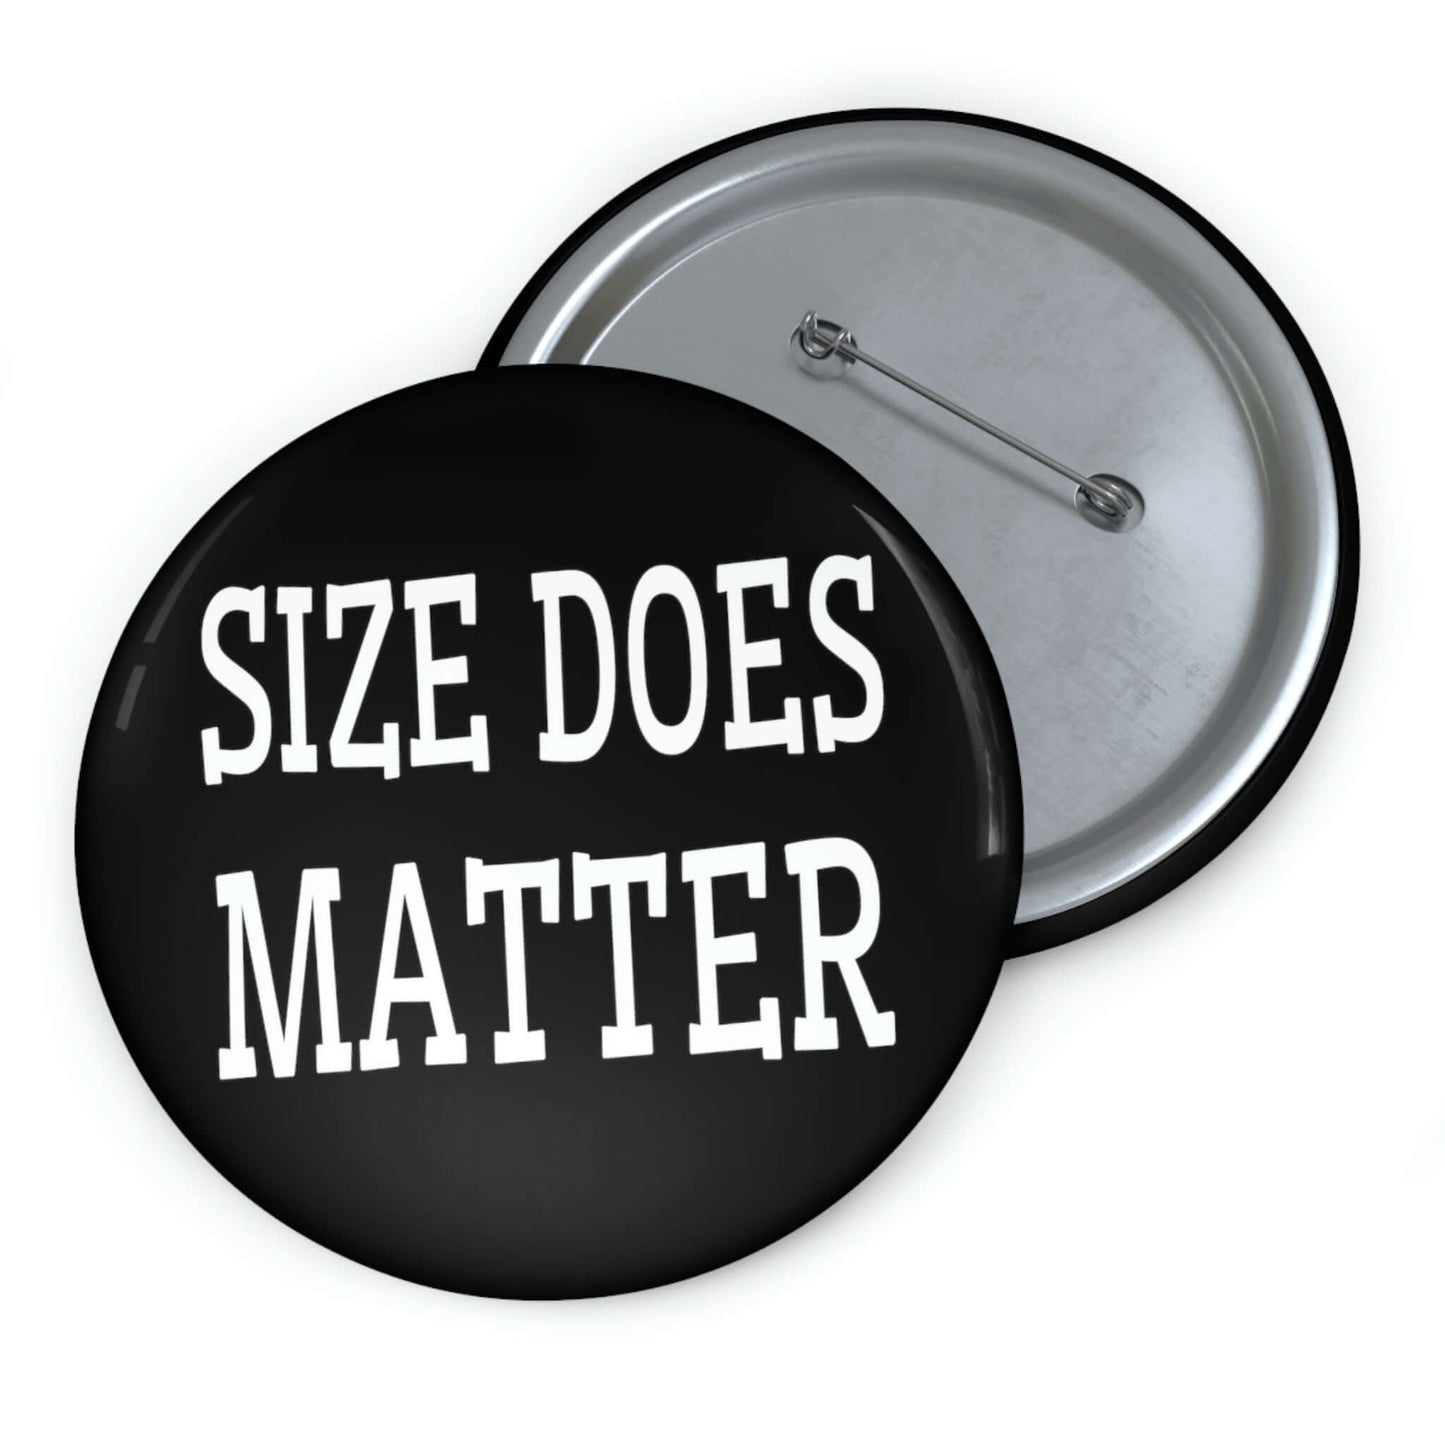 Size does matter pinback button